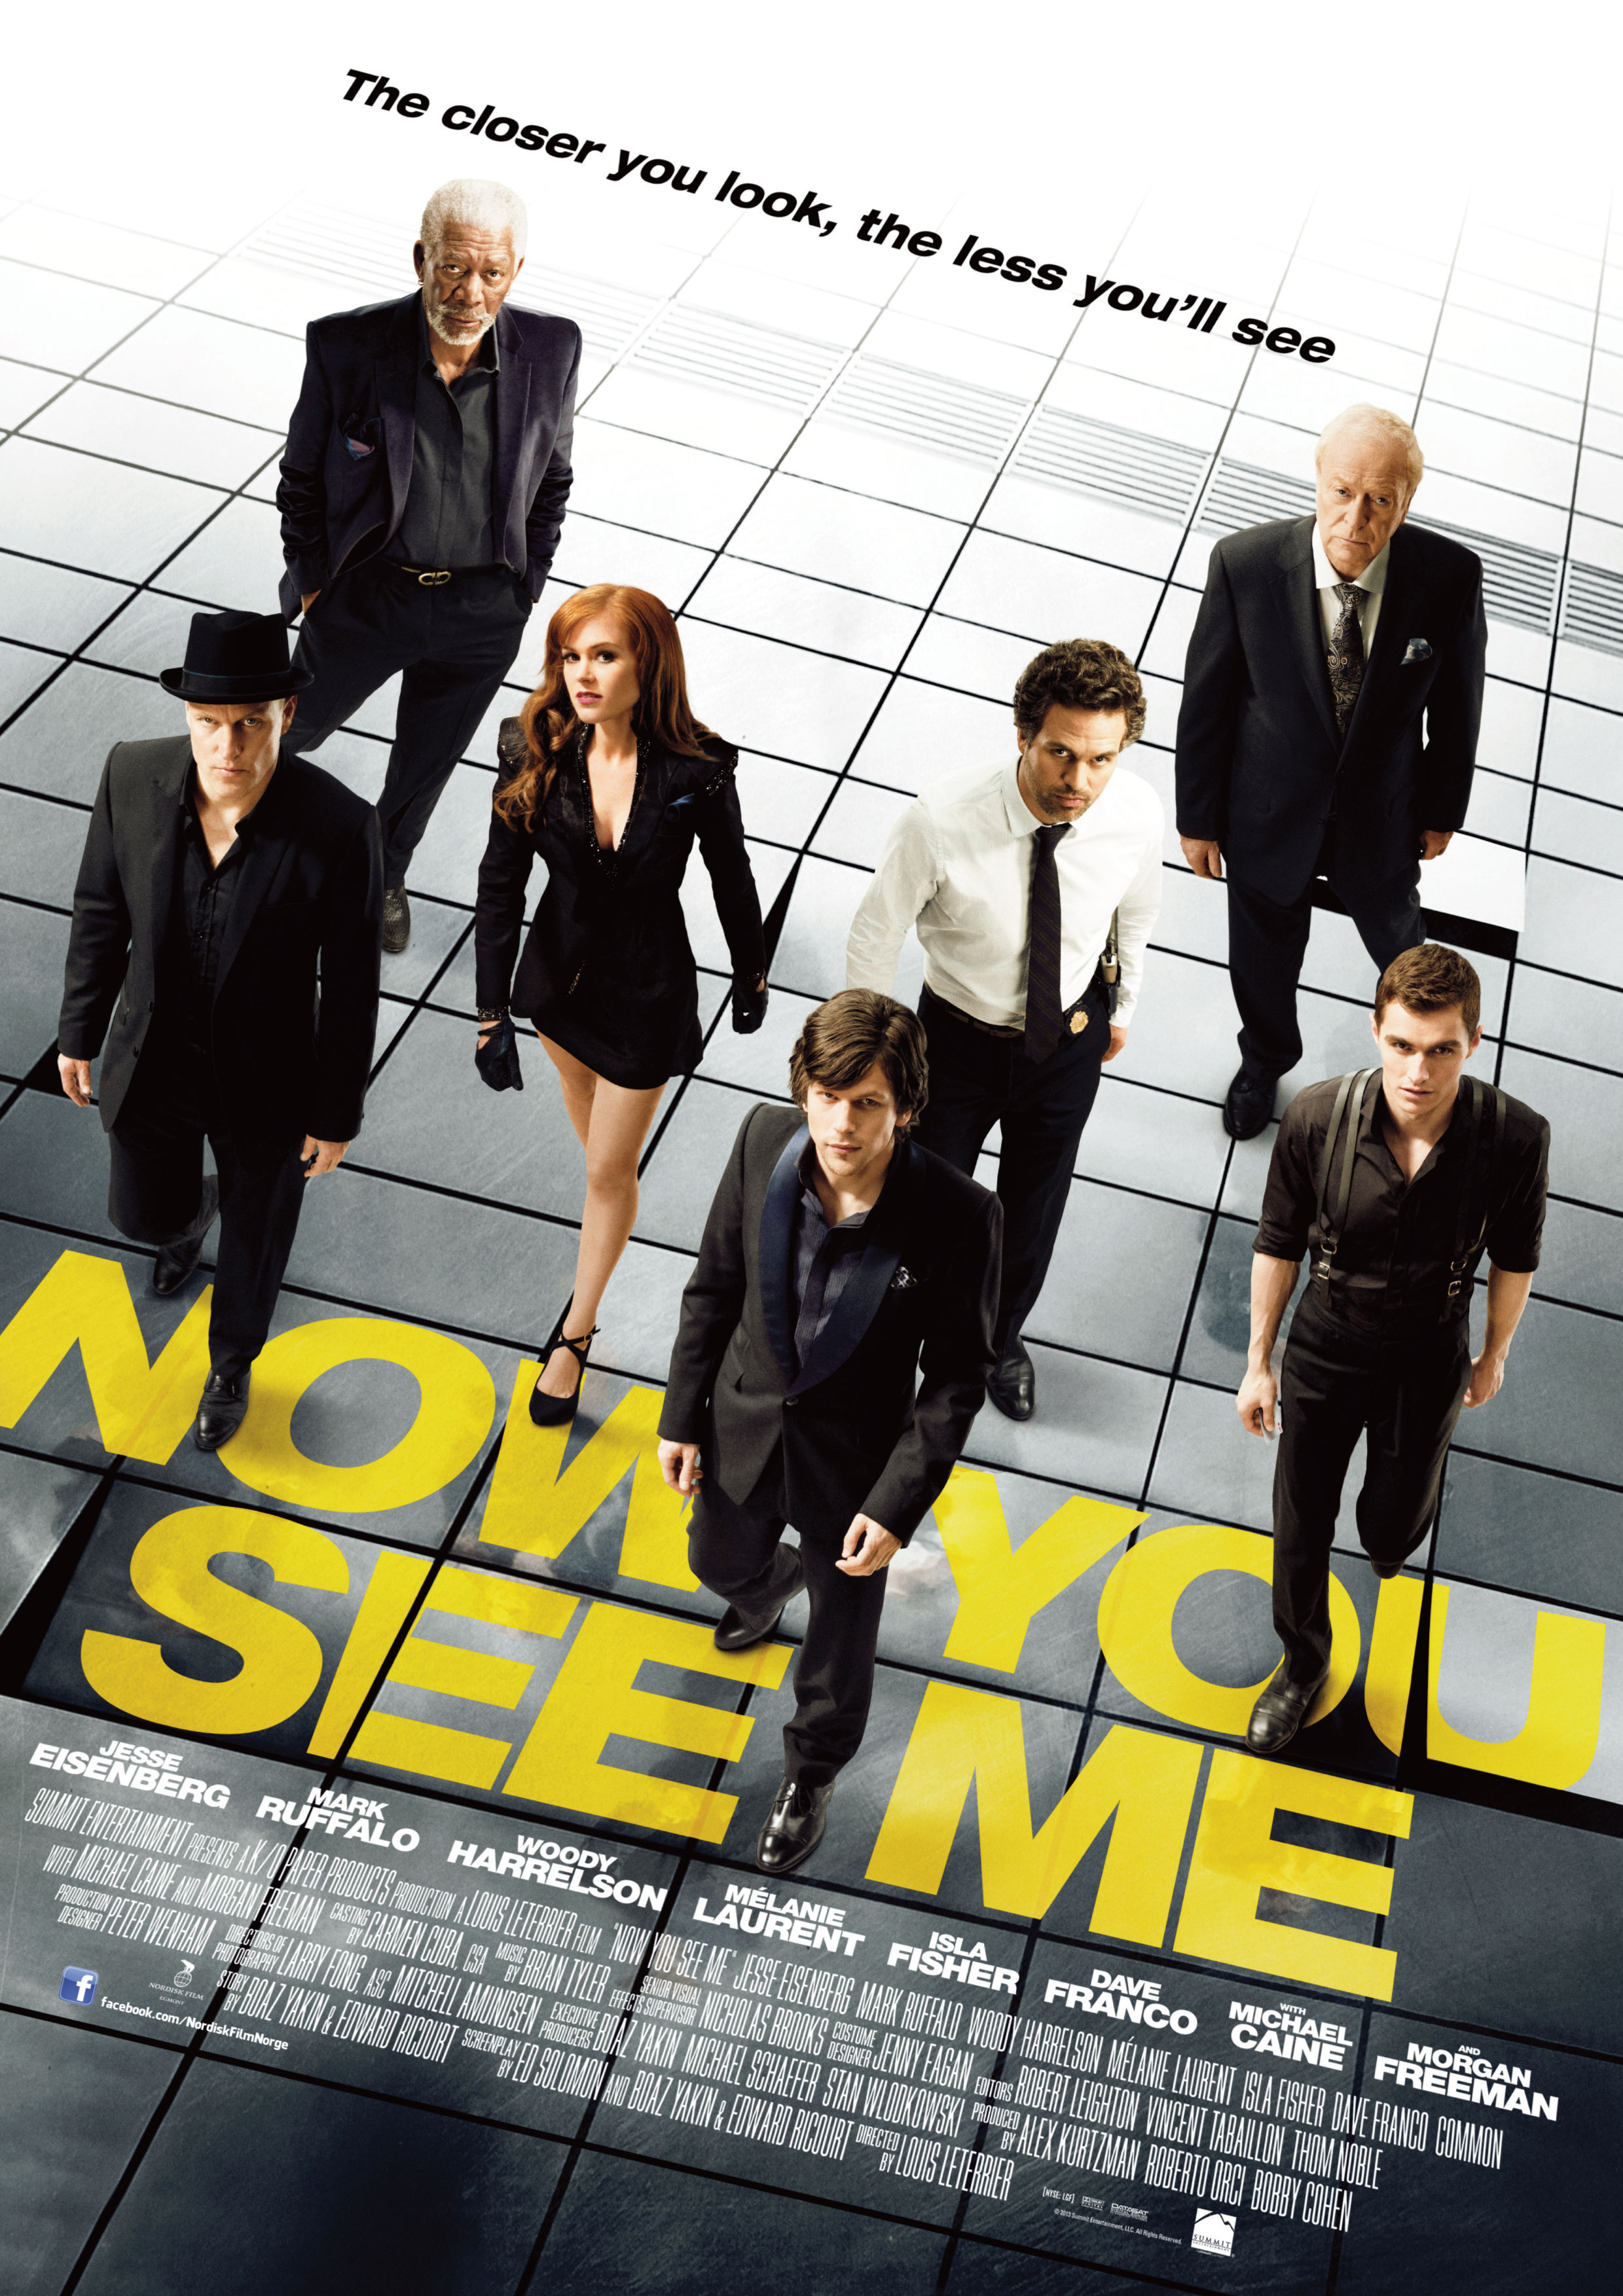 Now You See Me: Illusion and Magic